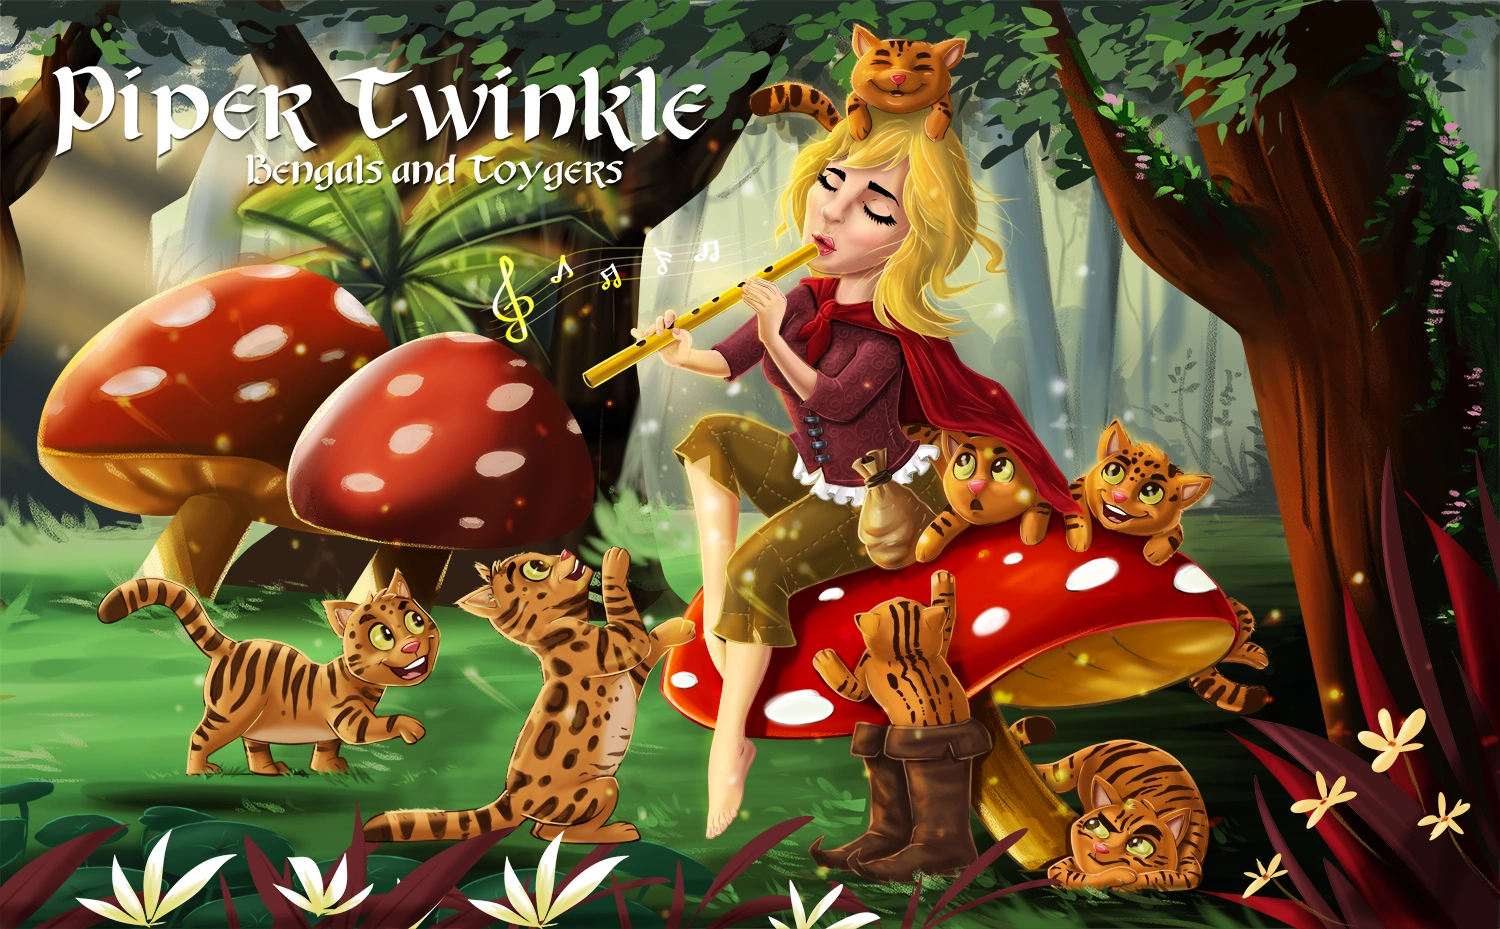 Pipertwinkle Bengals and Toygers, Registered with the New Zealand Cat Fancy and TICA.  